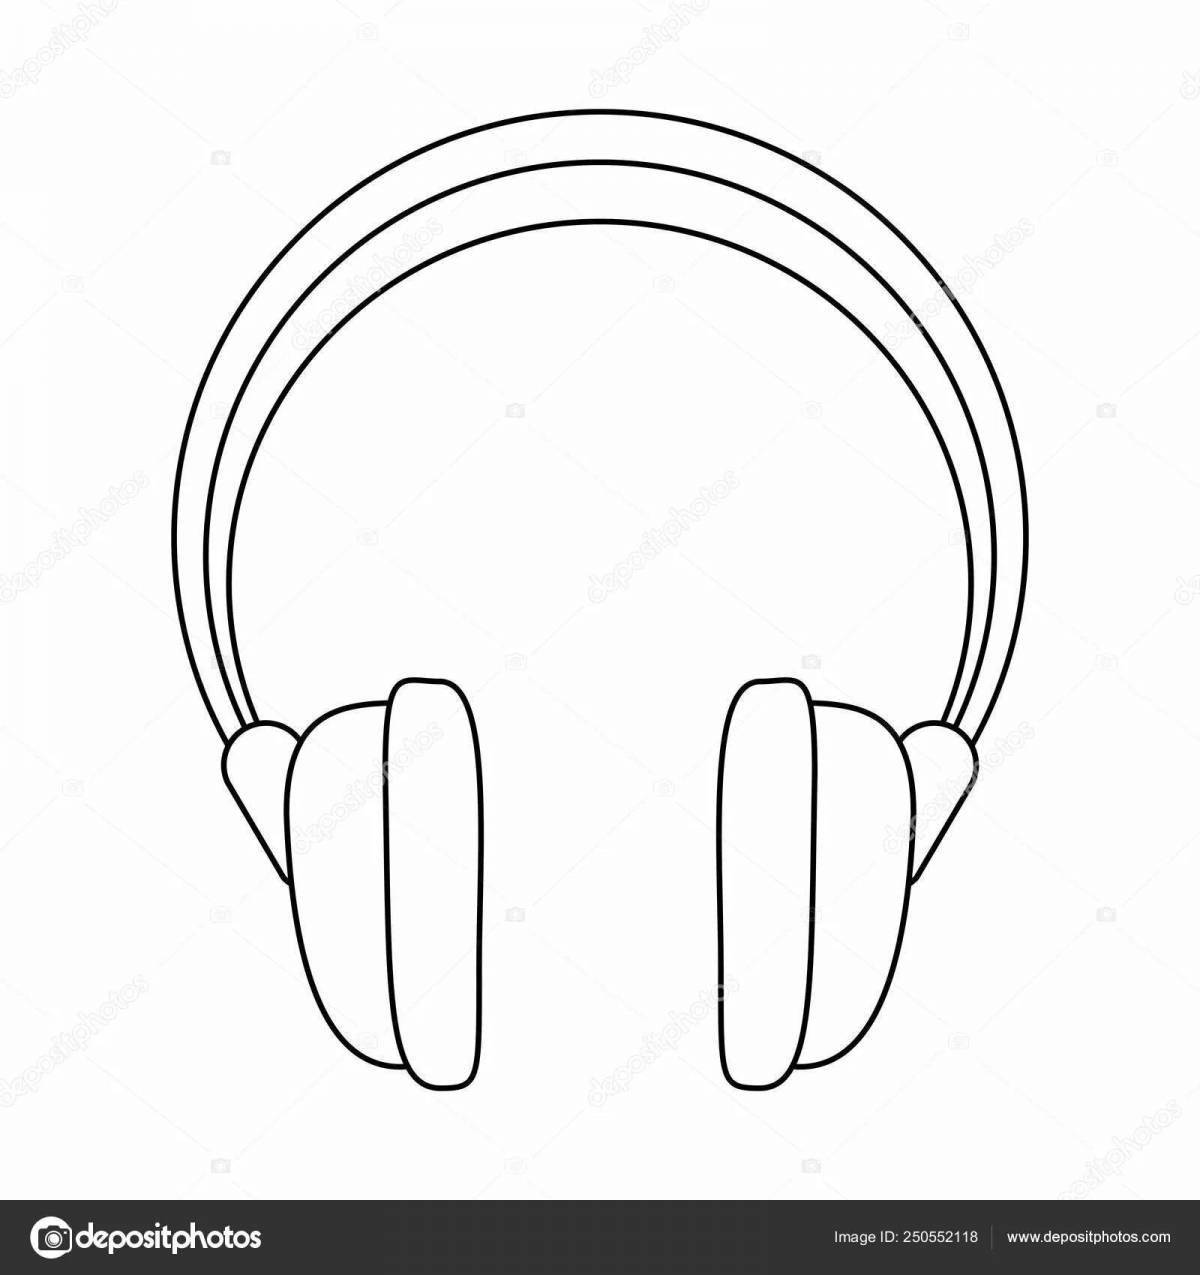 Creative headphone coloring for kids